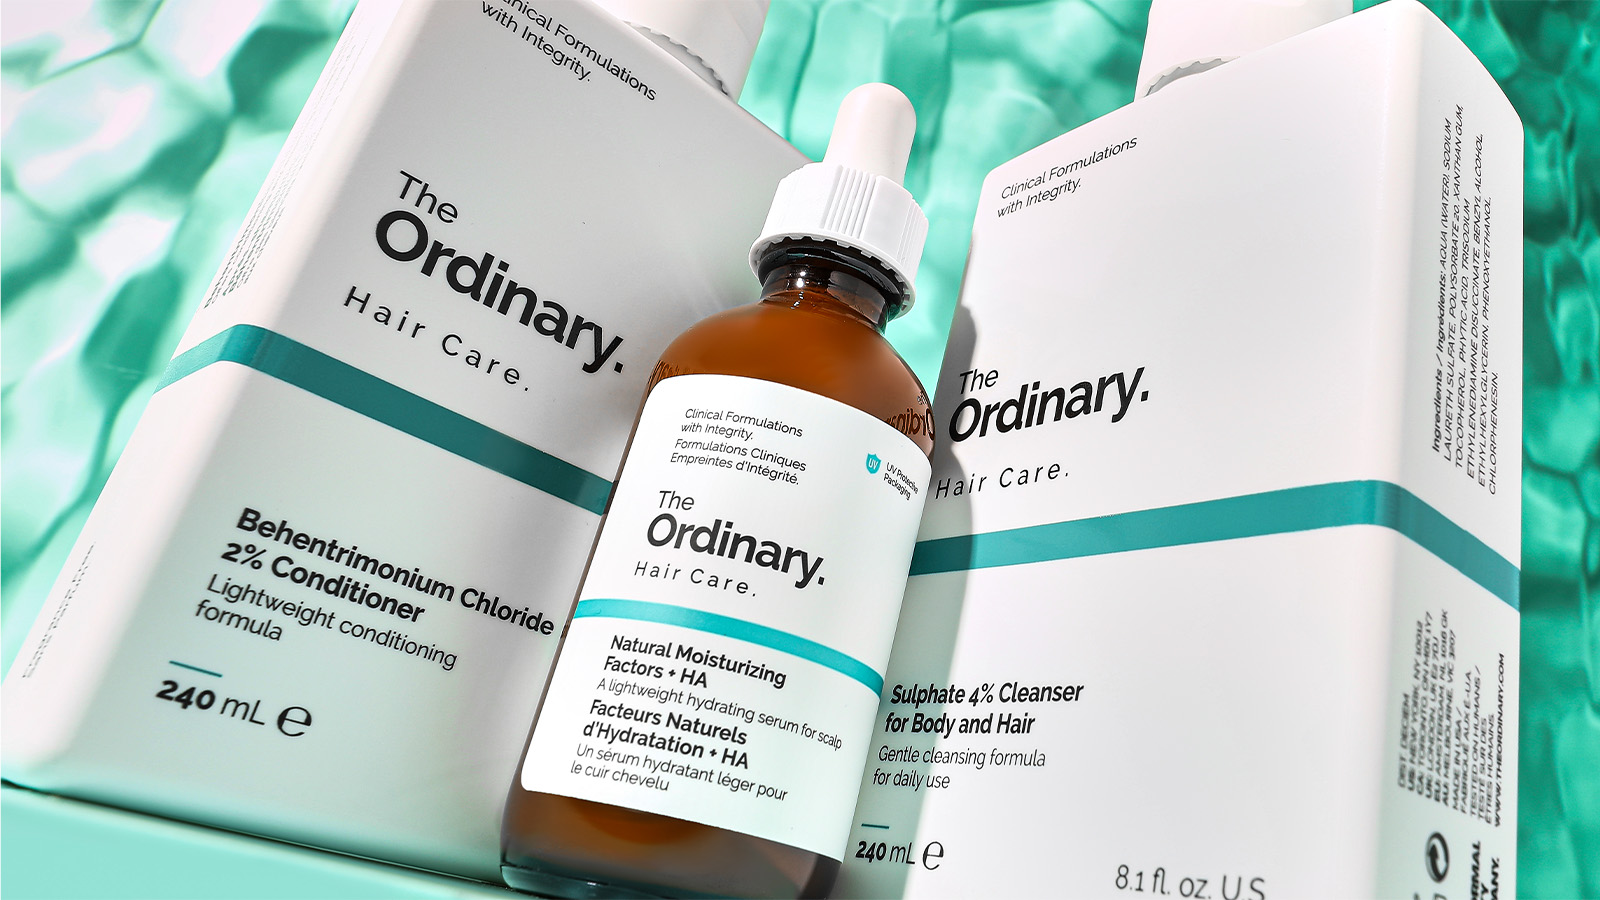 Everything You Need To Know About The Ordinary Haircare - Beauty Bay Edited